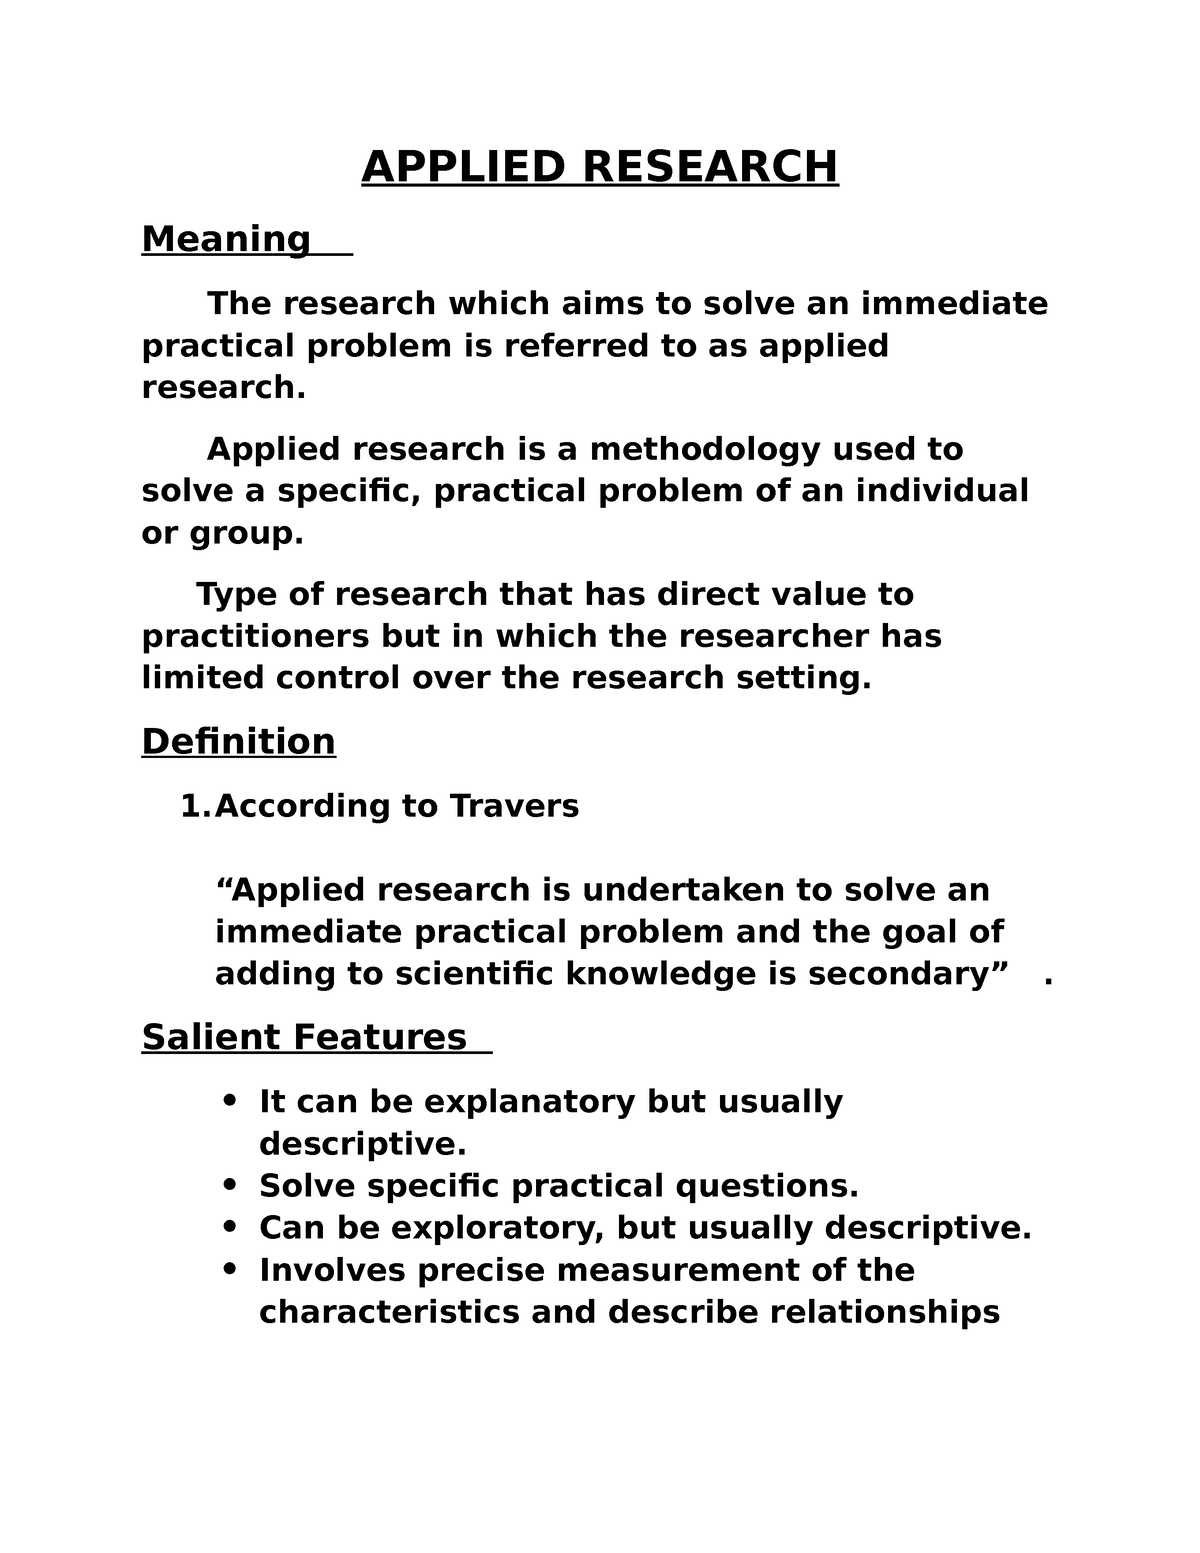 features of applied research